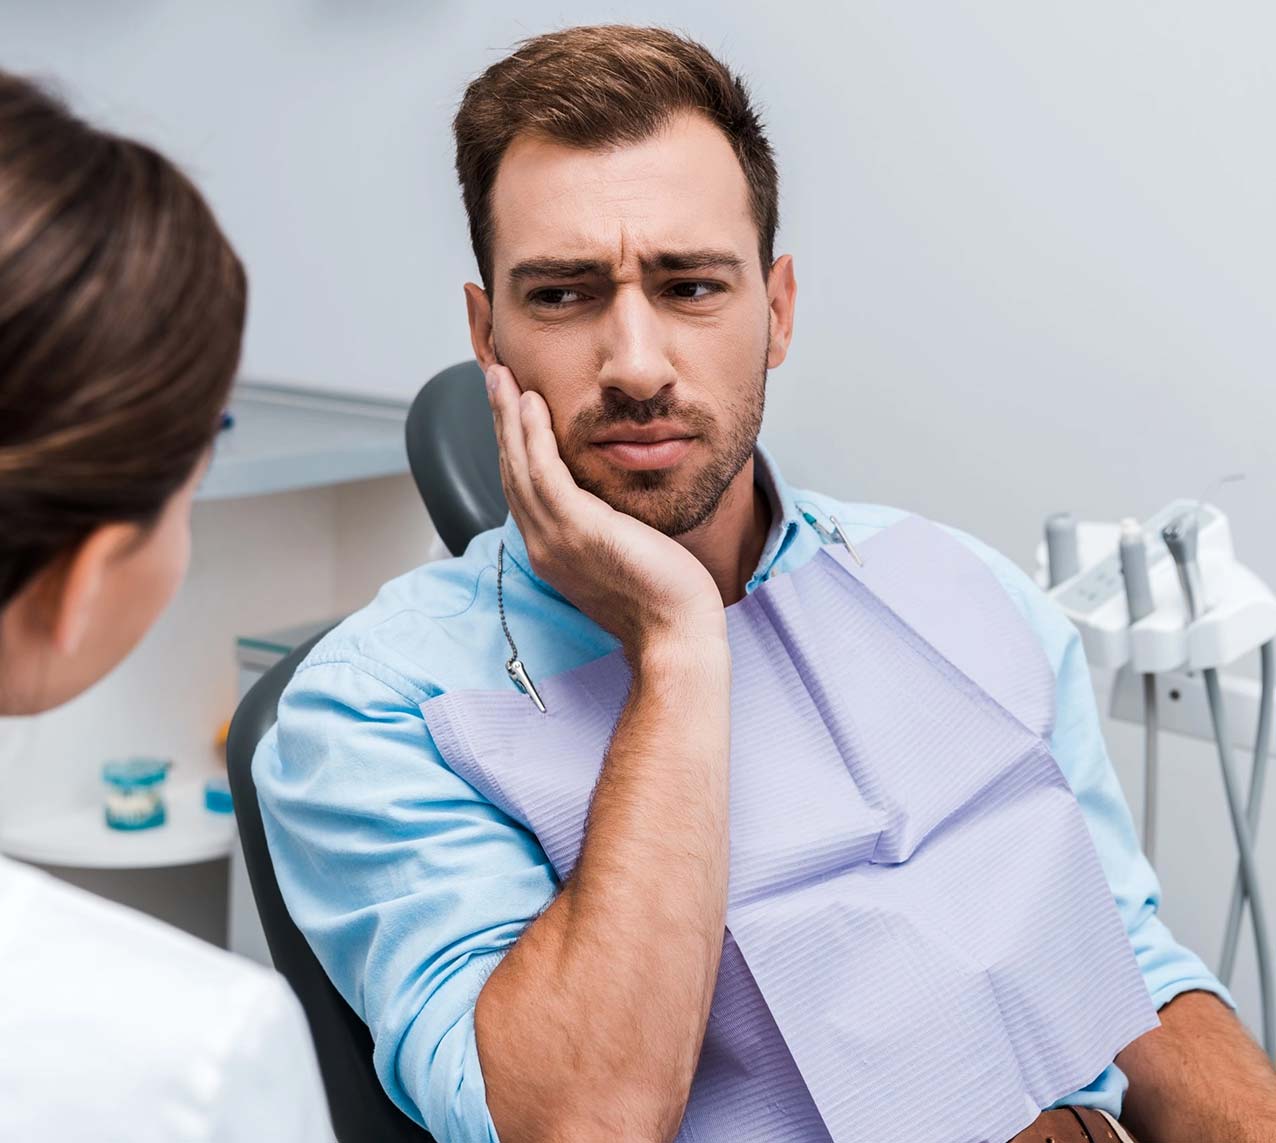 Male at the dentist experiencing tooth pain